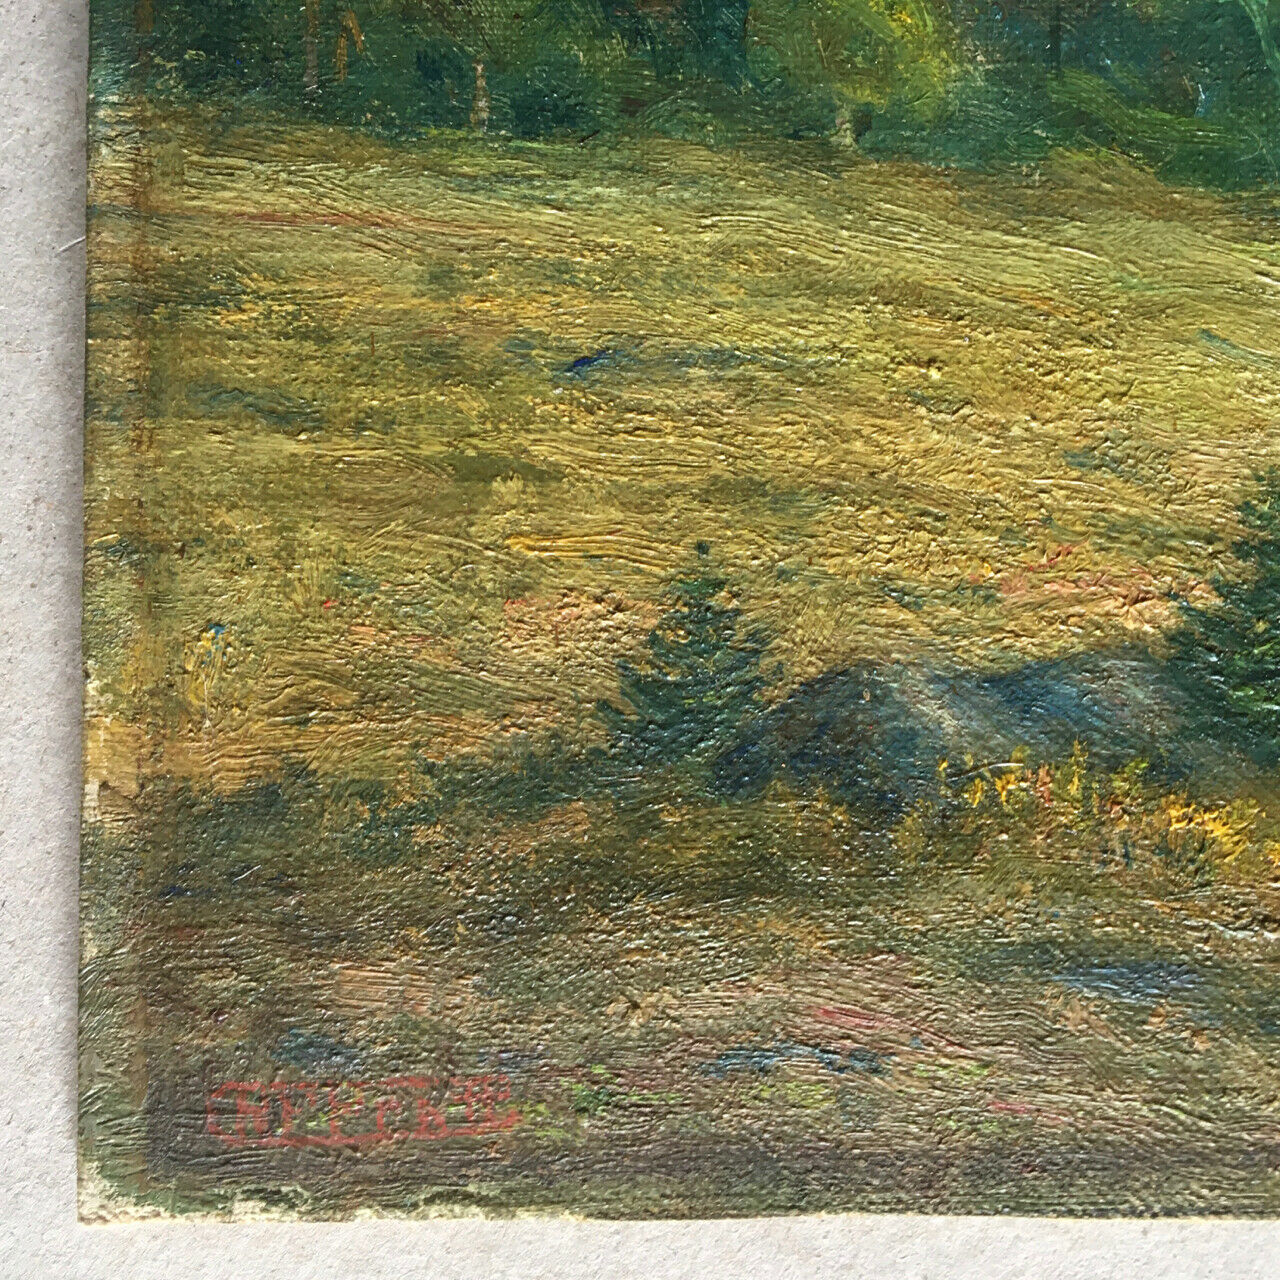 [American impressionism] Lakescape of New England — oil/canvas